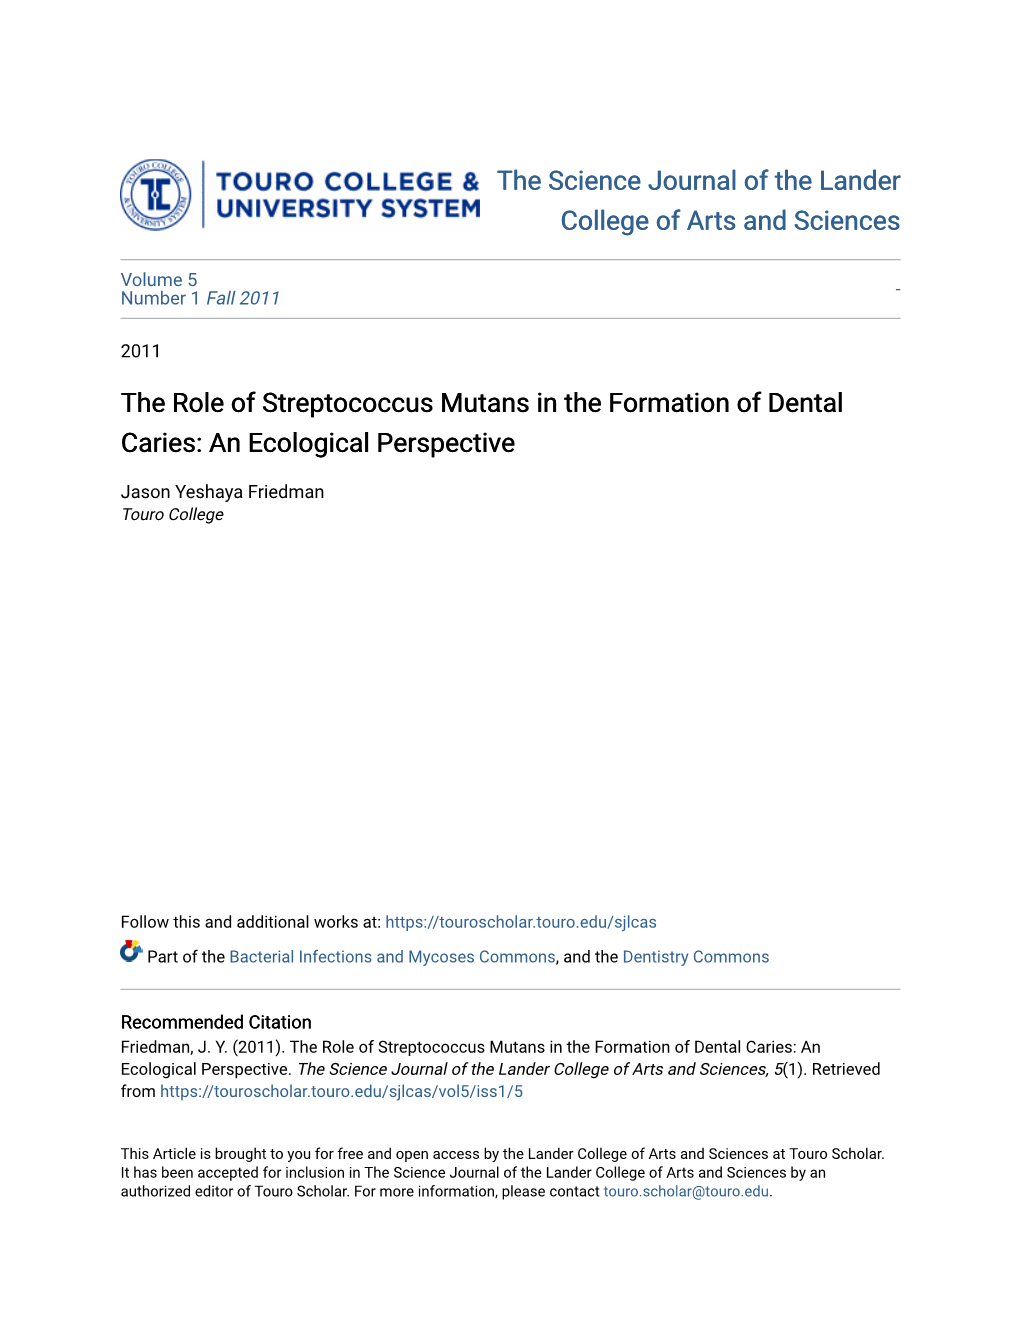 The Role of Streptococcus Mutans in the Formation of Dental Caries: an Ecological Perspective